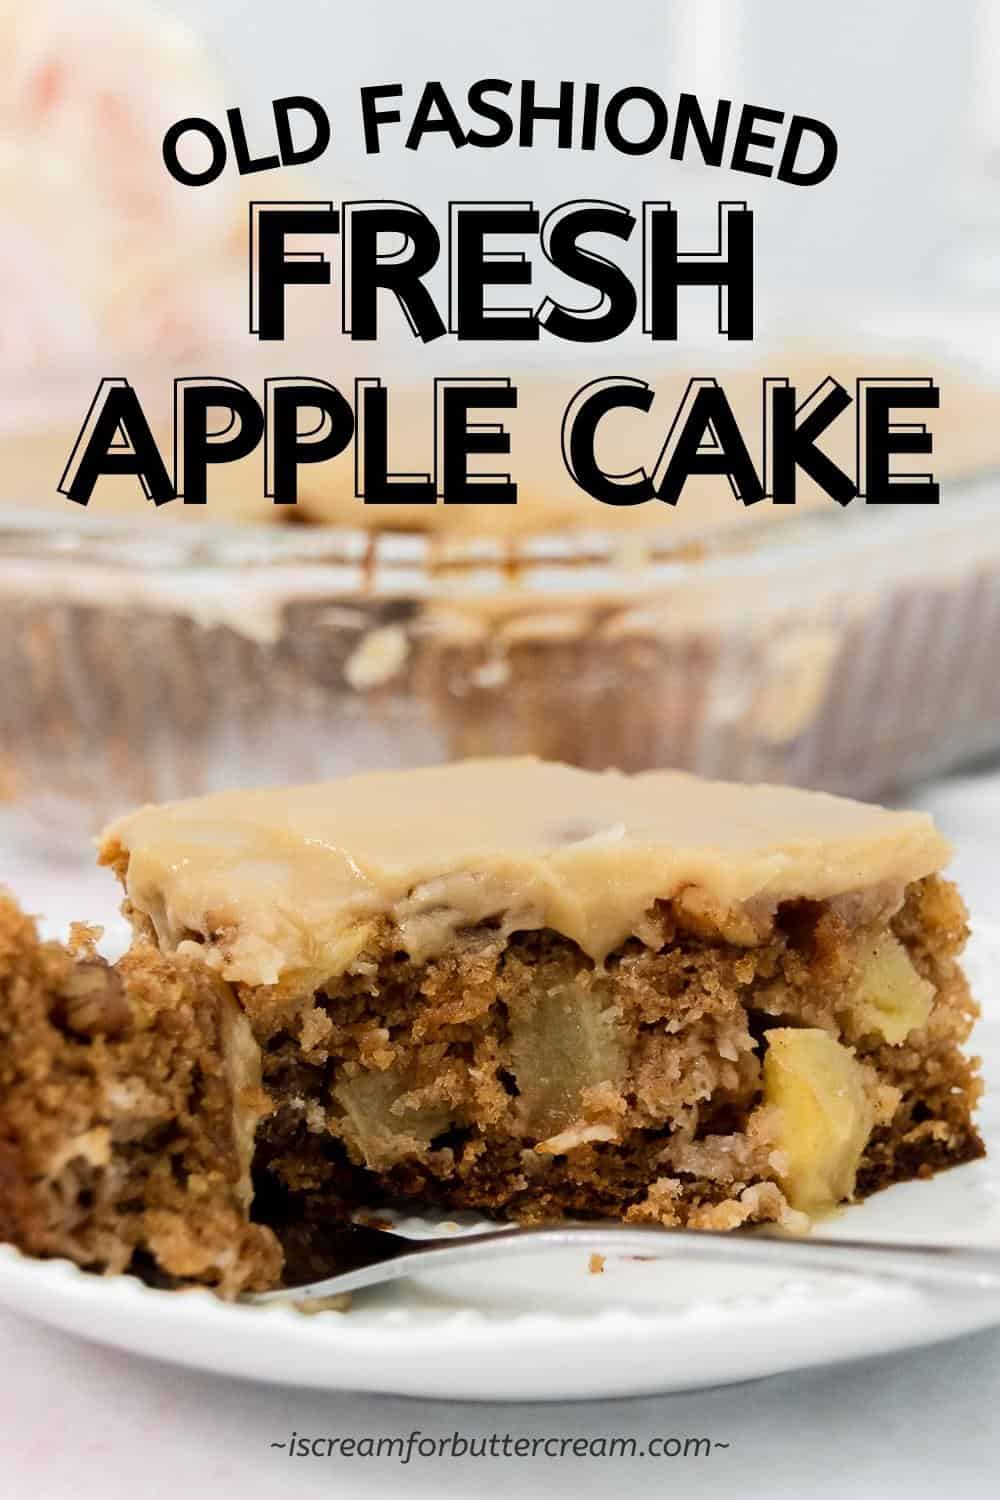 Close up of apple cake with text pin 1.